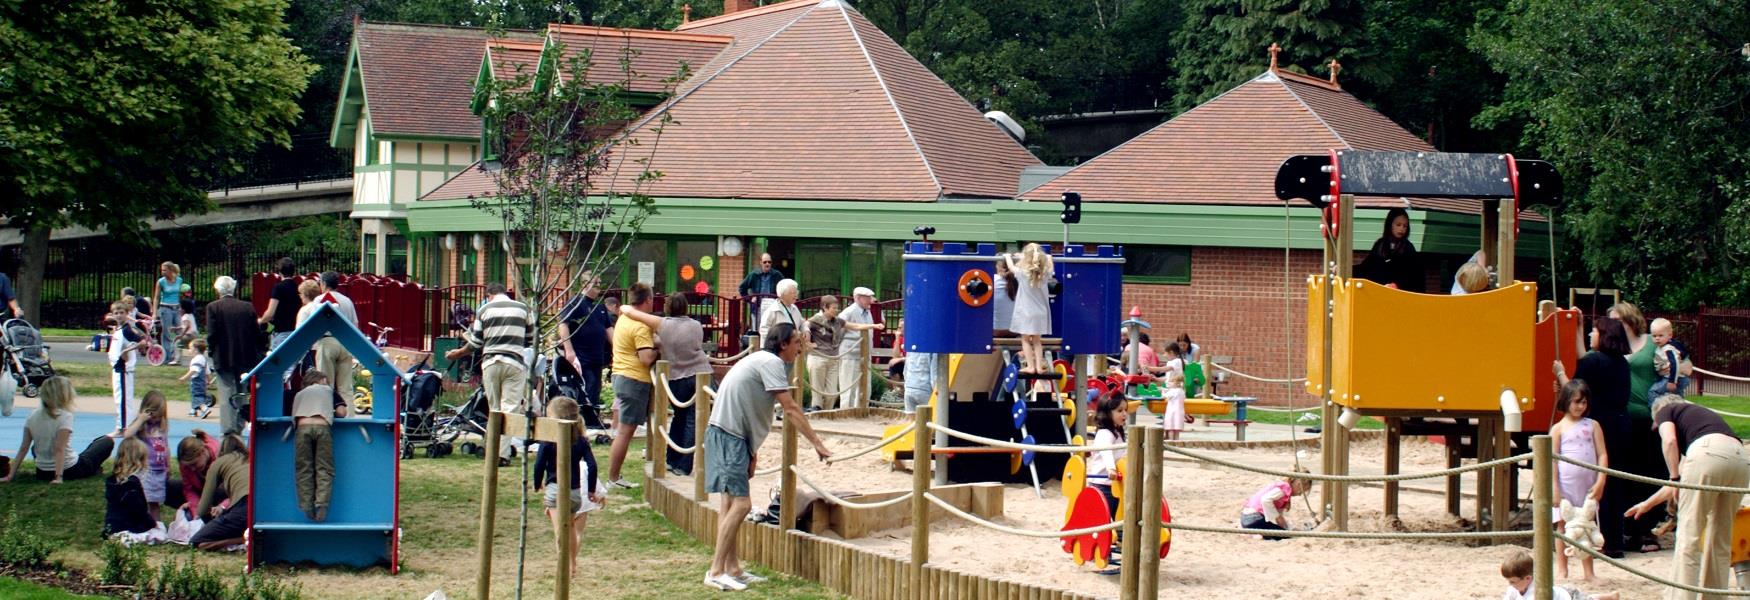 Play area at Queen's Park, Chesterfield